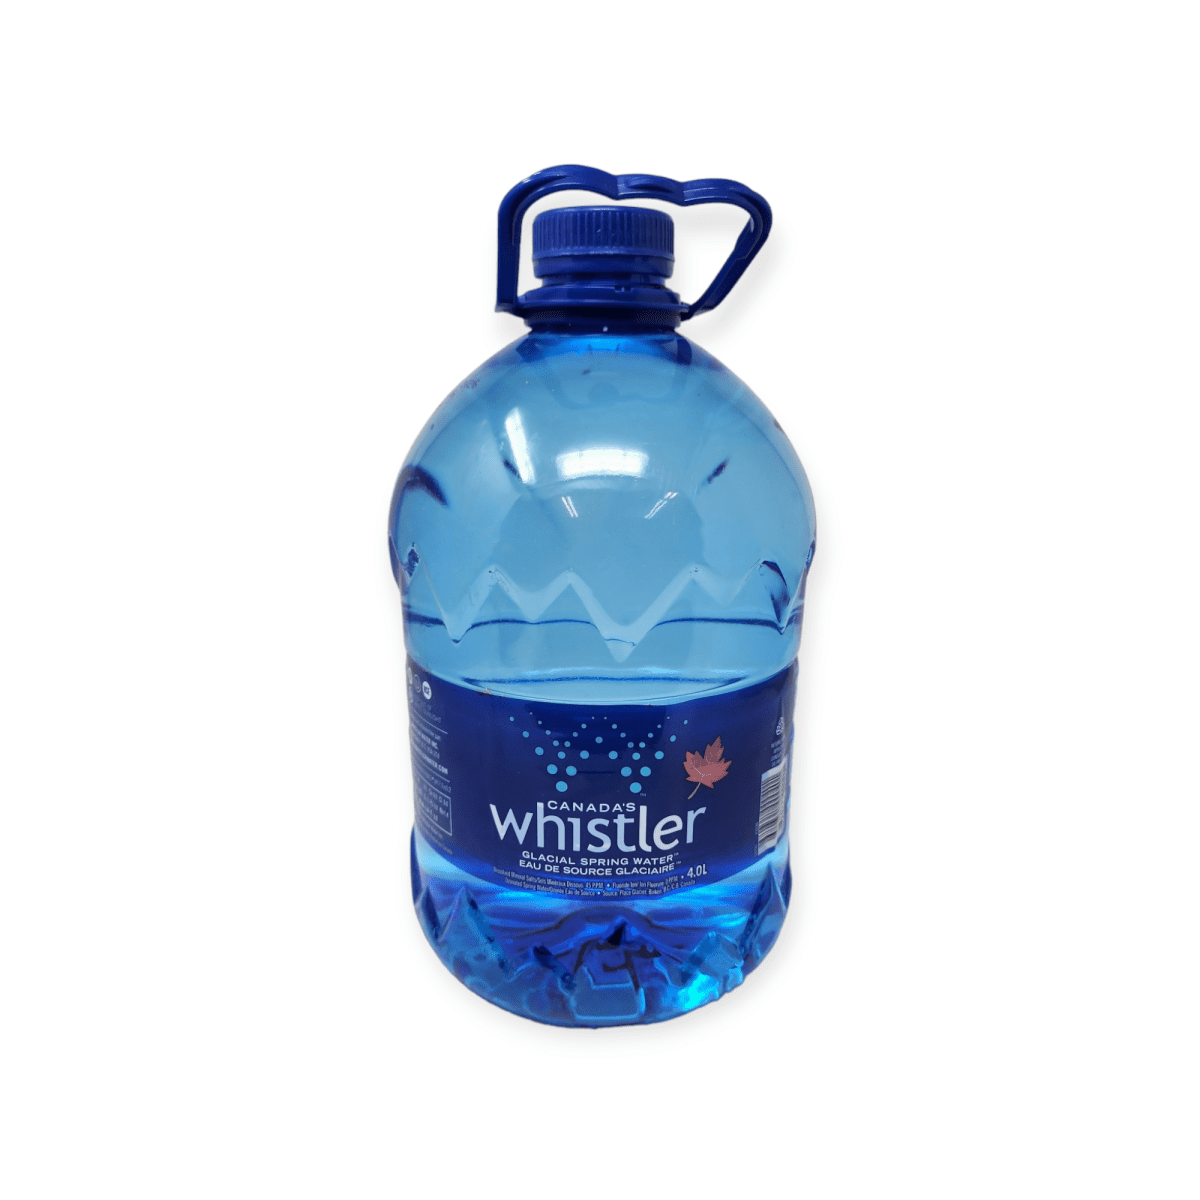 Canada’s Whistler Glacial Spring Water (4L)